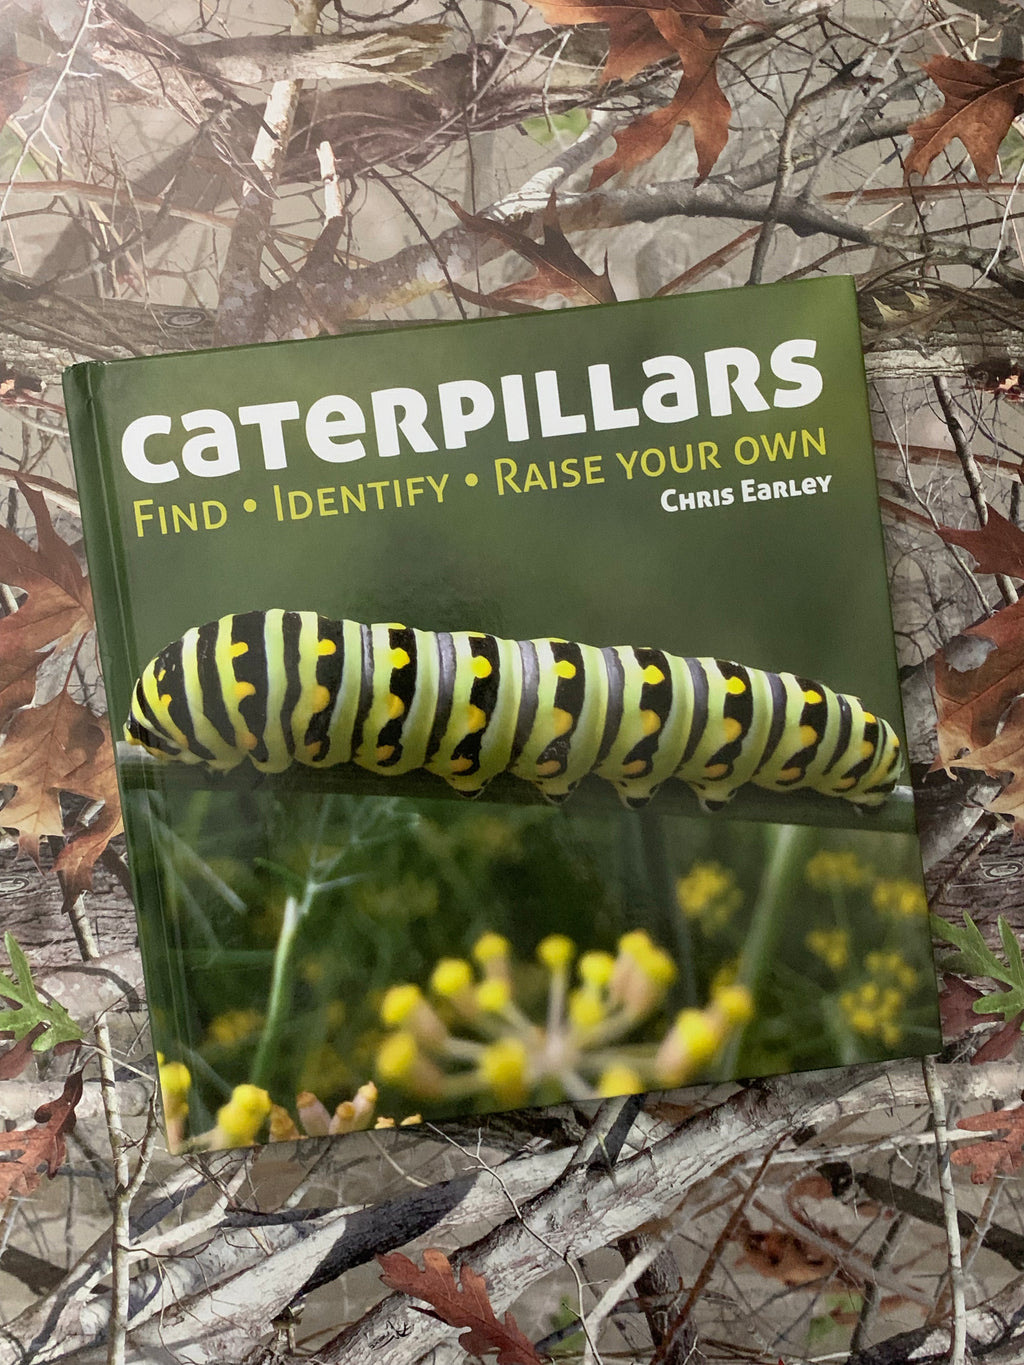 Caterpillars: Find, Identify, Raise Your Own- By Chris Early